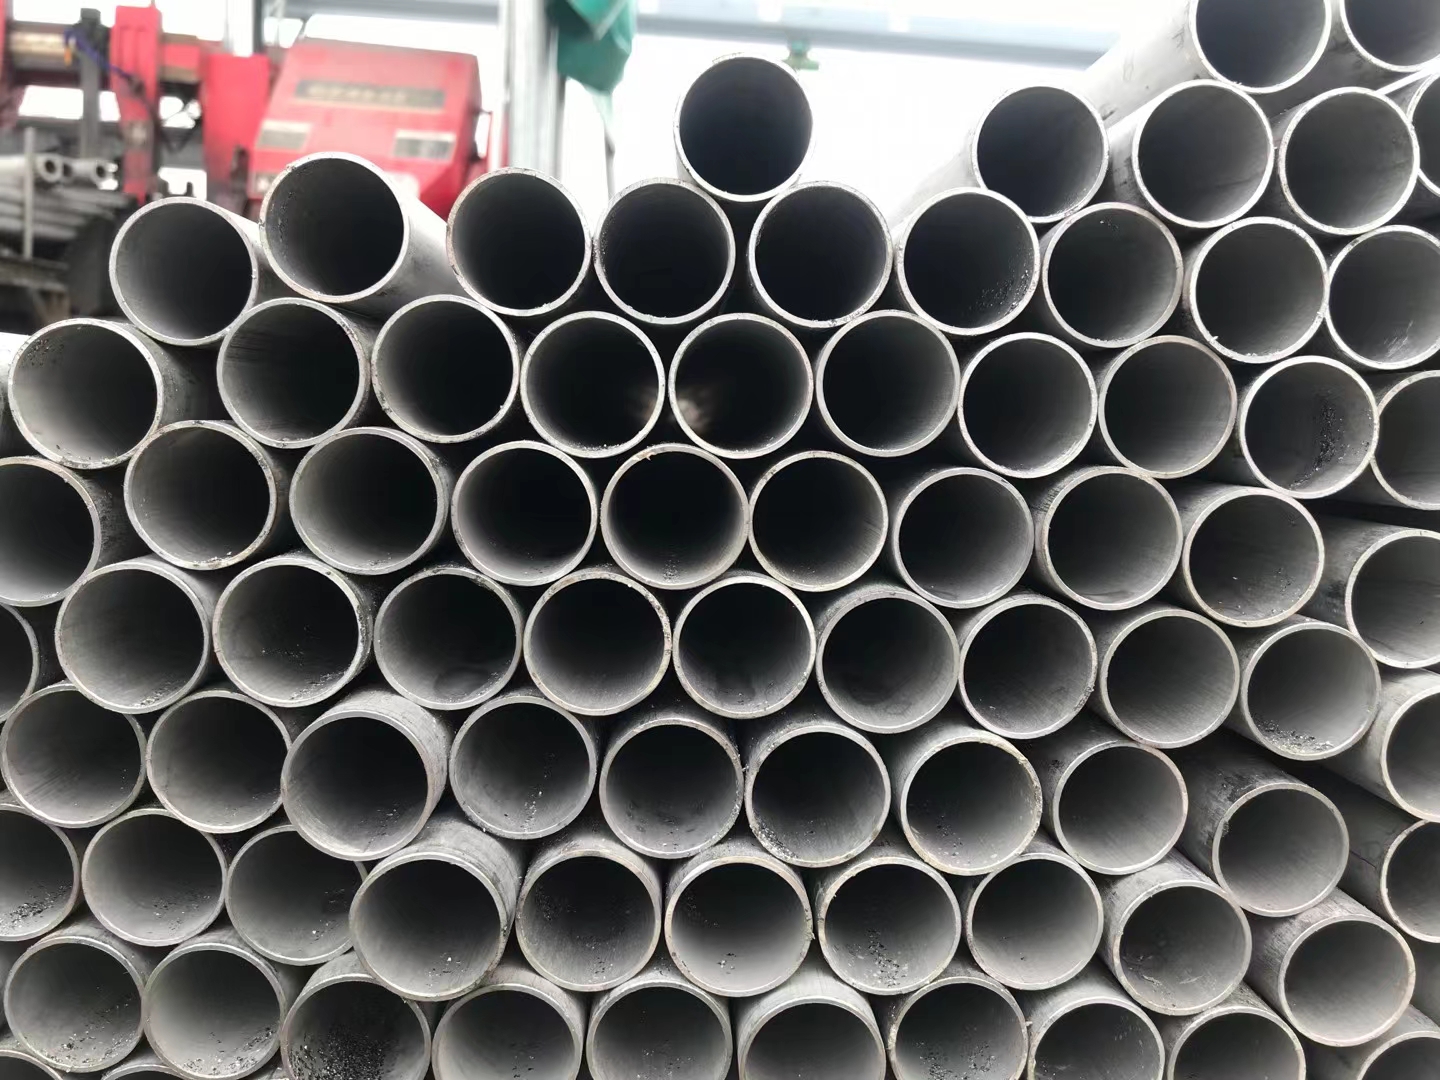 Super Purchasing for Stainless Steel Tube 304 - Alloy 2205 seamless and welded tube supplier – Cepheus